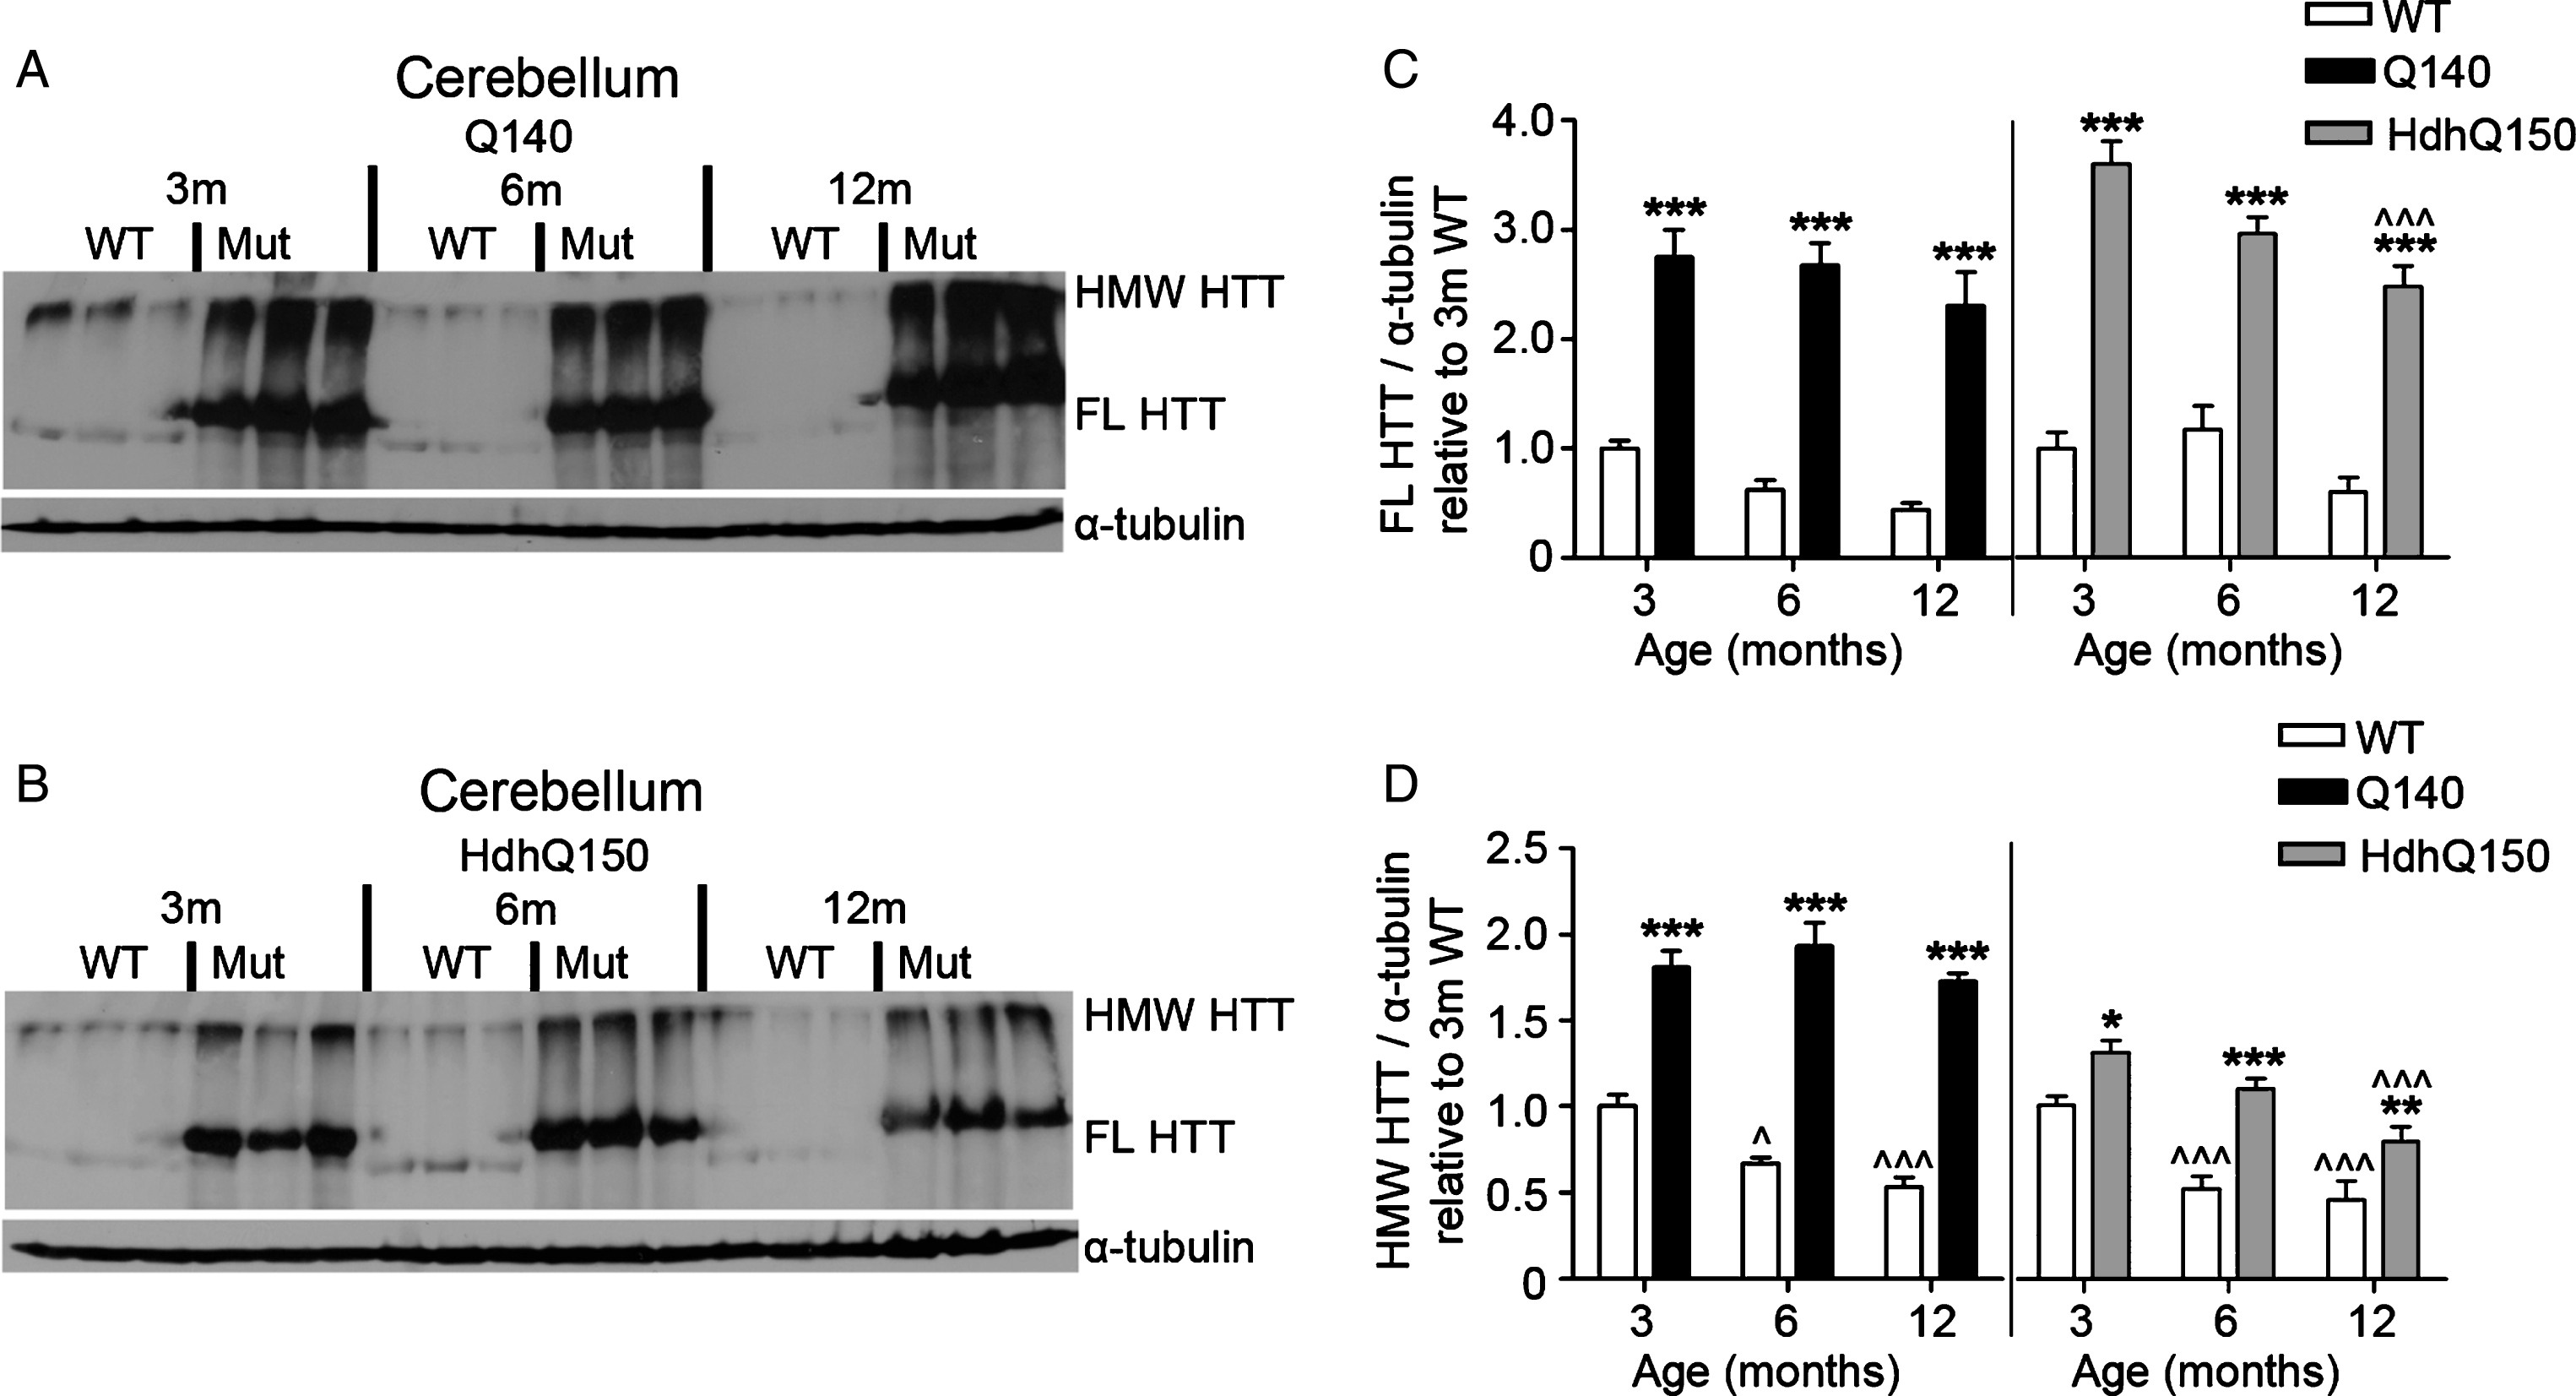 FL and HMW HTT protein levels detected with anti-HTT VB3130 are sustained in cerebellum of homozygous Q140 and HdhQ150 mice. Western blots of full-length (FL) HTT (∼350 kDa) and high molecular weight (HMW) HTT (running at the top of the separating gel) species and α-tubulin loading control, at 3, 6 and 12 months of age in knock-in mice and their WT littermates in (A) Q140 cerebellum, and (B) HdhQ150 cerebellum. Protein lysate samples were run across two western blots for each knock-in mouse line and data were averaged, n = 3 per group per western blot for a total of n = 6 mice per group. Graphs show mean+SEM (n = 6) HTT/α-tubulin in 3, 6 and 12 months old Q140 and HdhQ150 mice and WT littermates, relative to WT levels at 3 months for (C) cerebellar FL HTT, and (D) cerebellar HMW HTT. Two-way ANOVA with Bonferroni post-hoc tests, within each knock-in mouse line: *p < 0.05, **p < 0.01, ***p < 0.001, compared to WT littermates at the same age;  ∧
p < 0.05,  ∧∧
p < 0.01,  ∧∧∧
p < 0.001, compared to 3 month old mice of the same genotype.